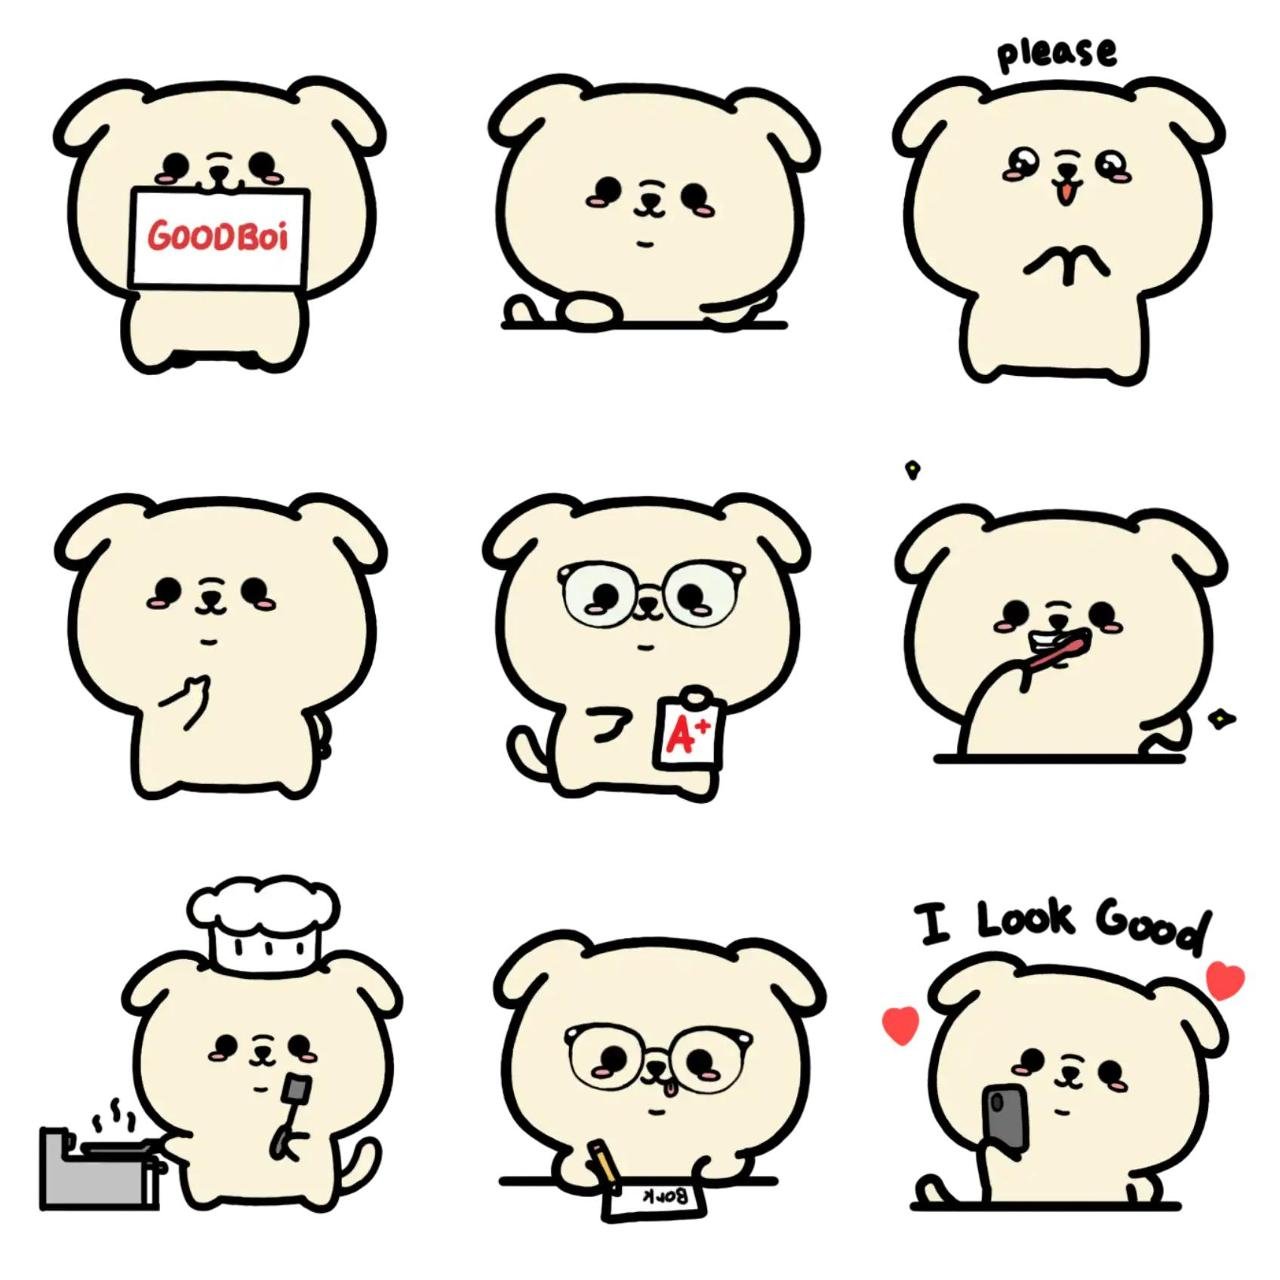 Goodboi Animation/Cartoon,Animals sticker pack for Whatsapp, Telegram, Signal, and others chatting and message apps